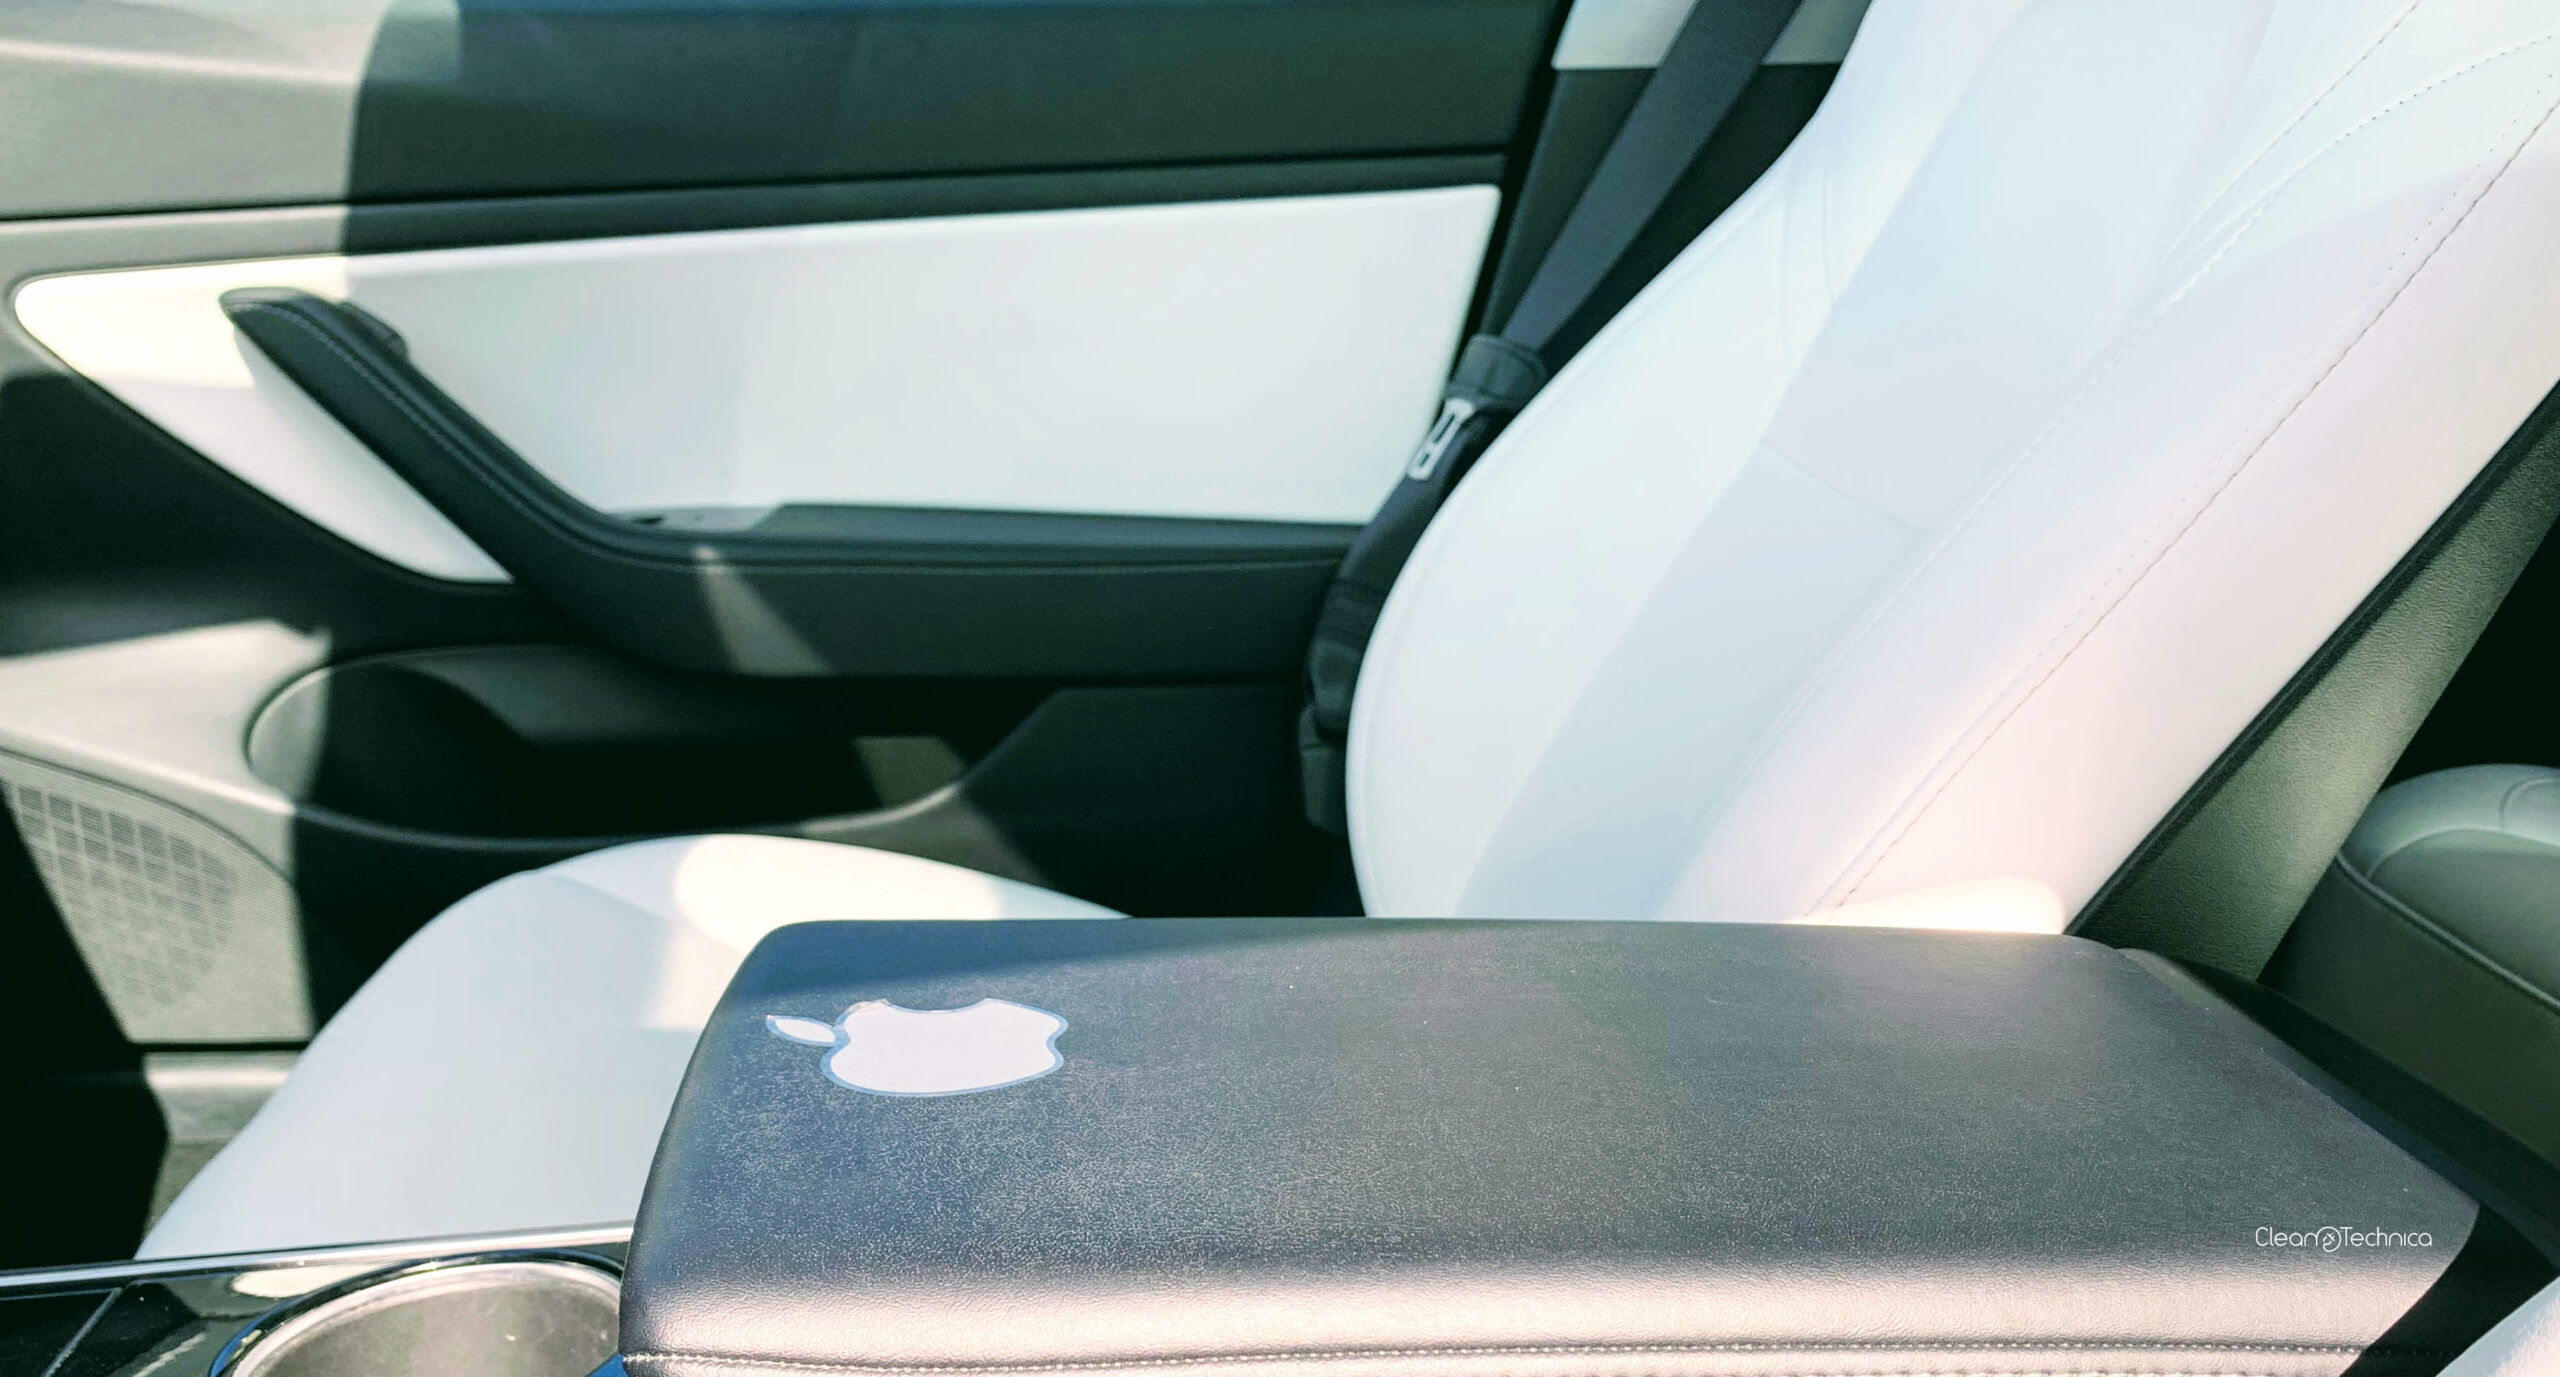 Apple Car Resembled Volkswagen ID.Buzz & Canoo Lifestyle Designs [Video]